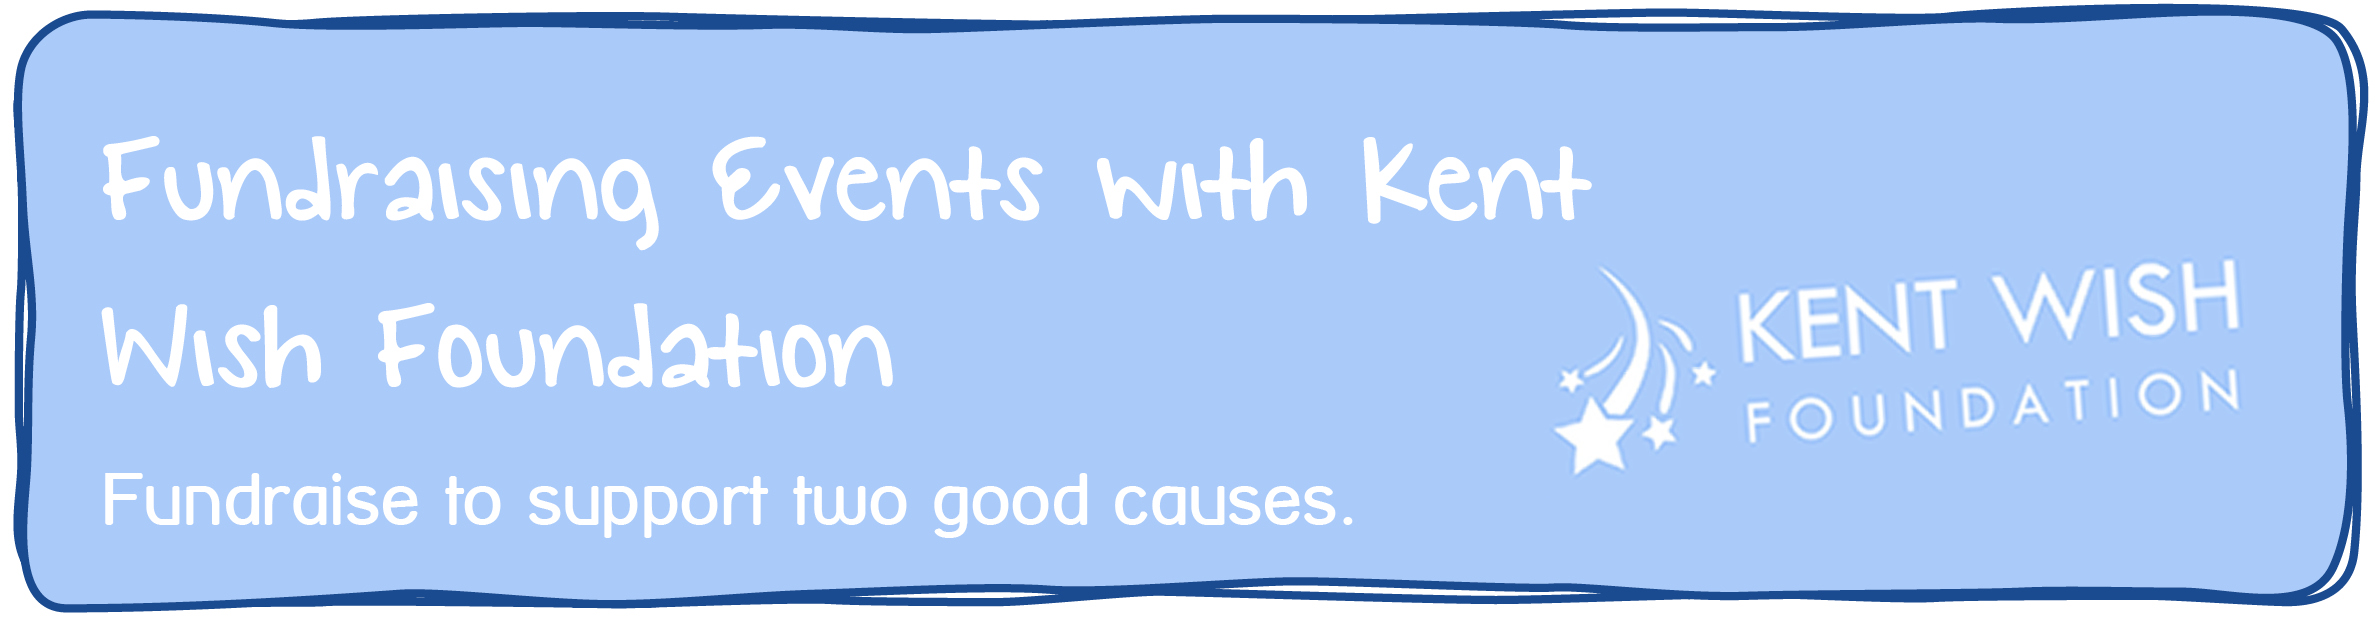 Fundraising Events with Kent Wish Foundation. Fundraise to support two good causes.